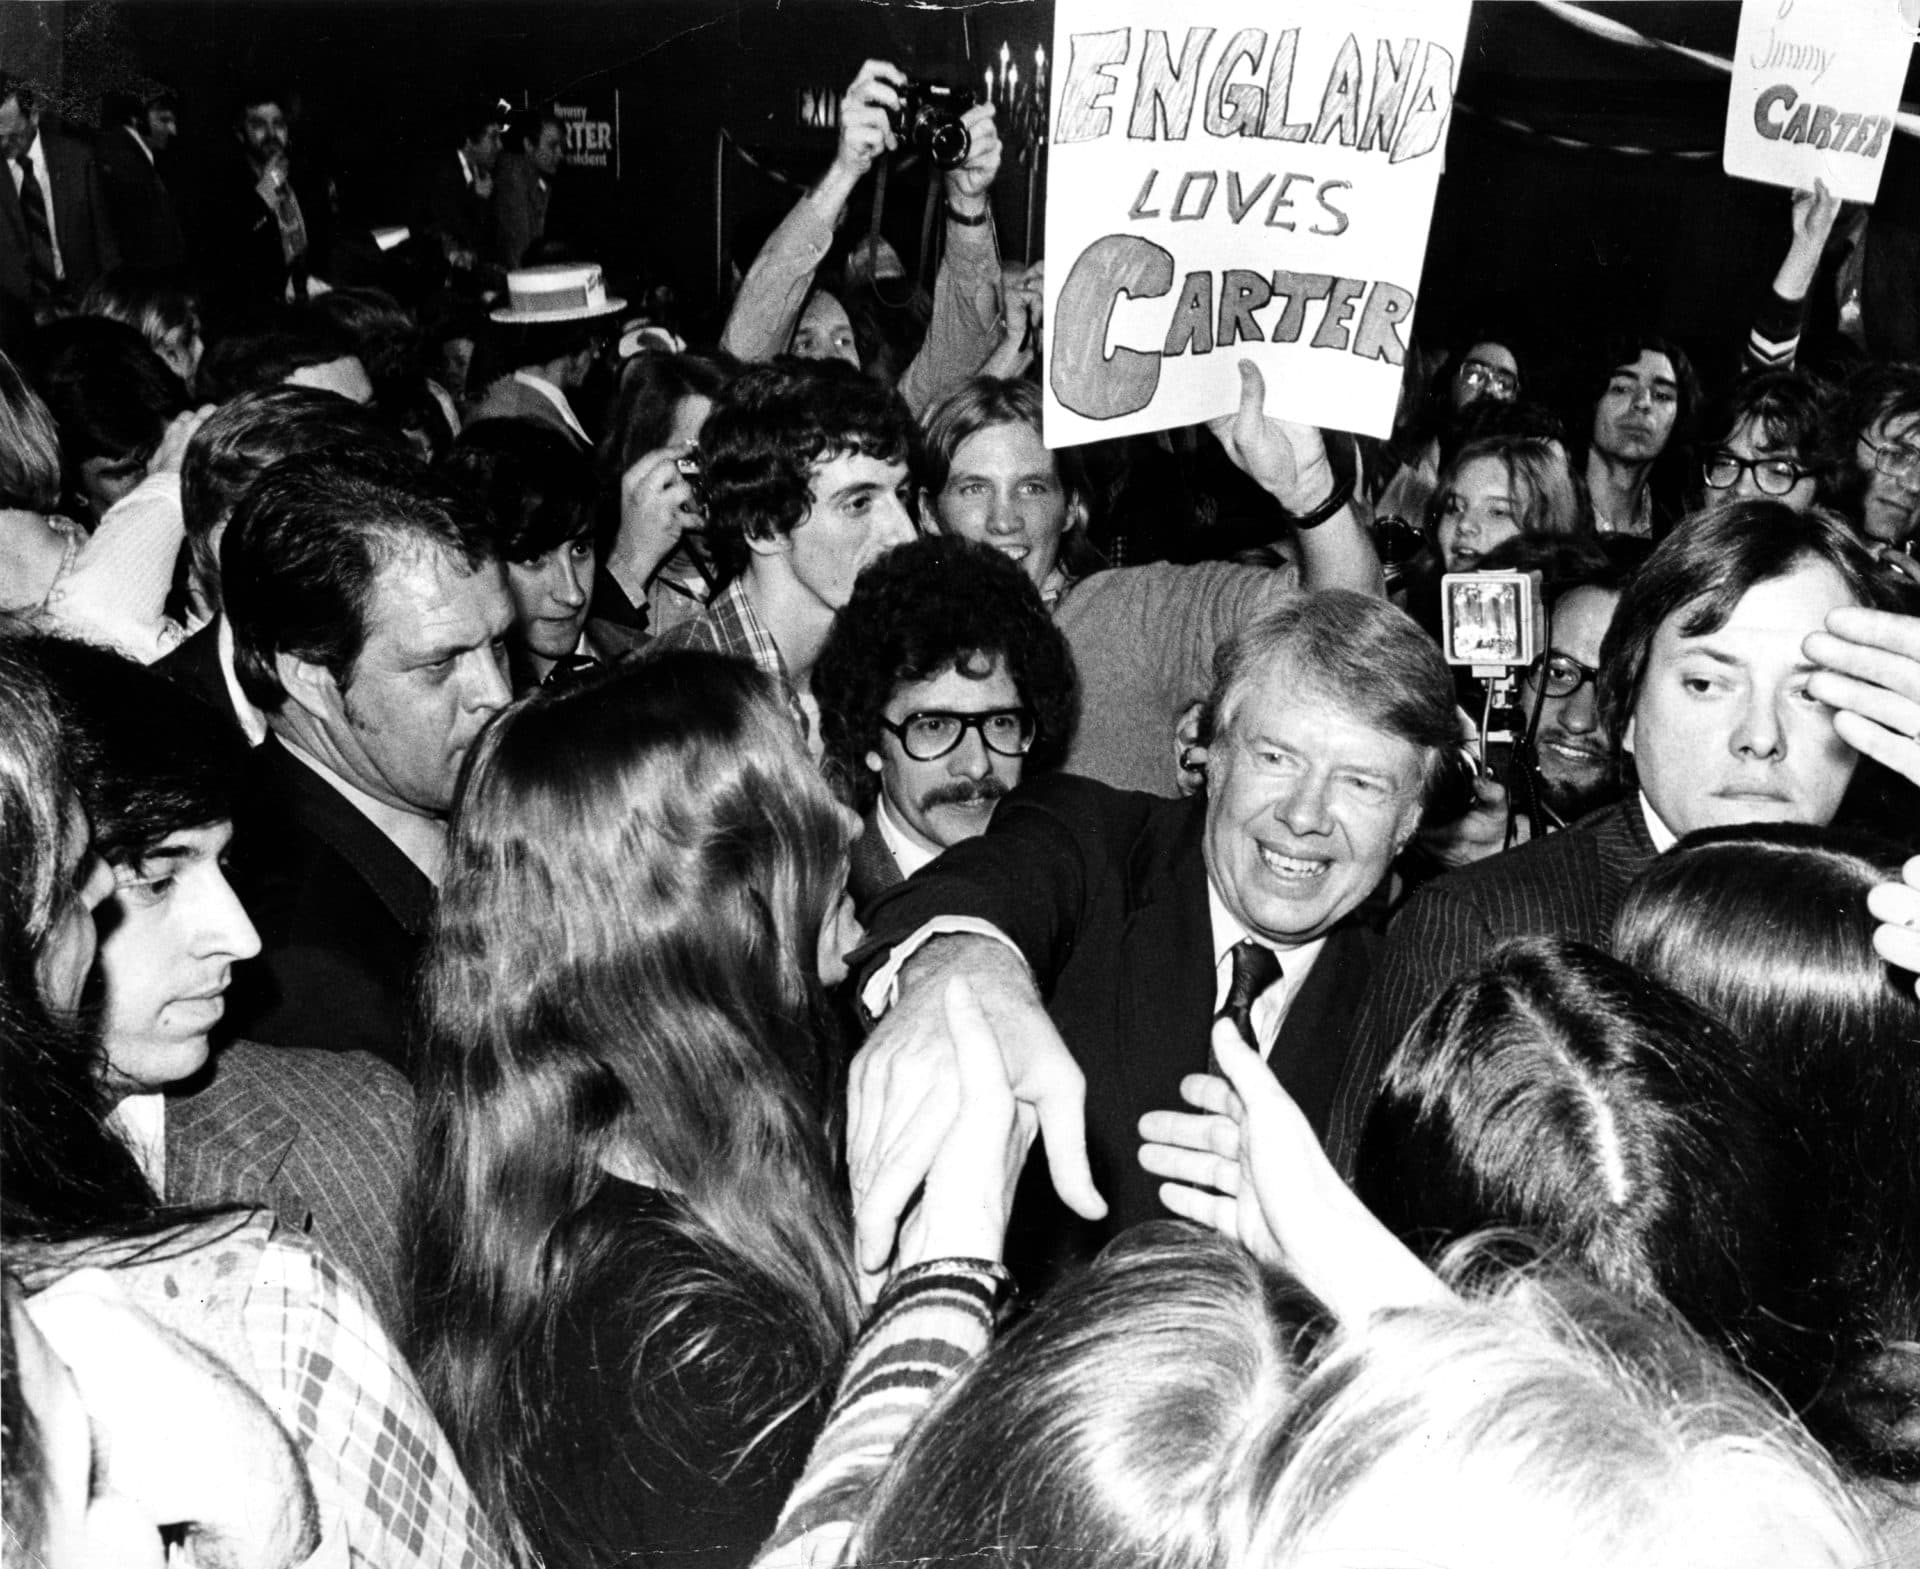 Jimmy Carter greets a crowd at the Carpenter Hotel in Manchester, N.H. in 1976. (Ulrike Welsch/The Boston Globe via Getty Images)